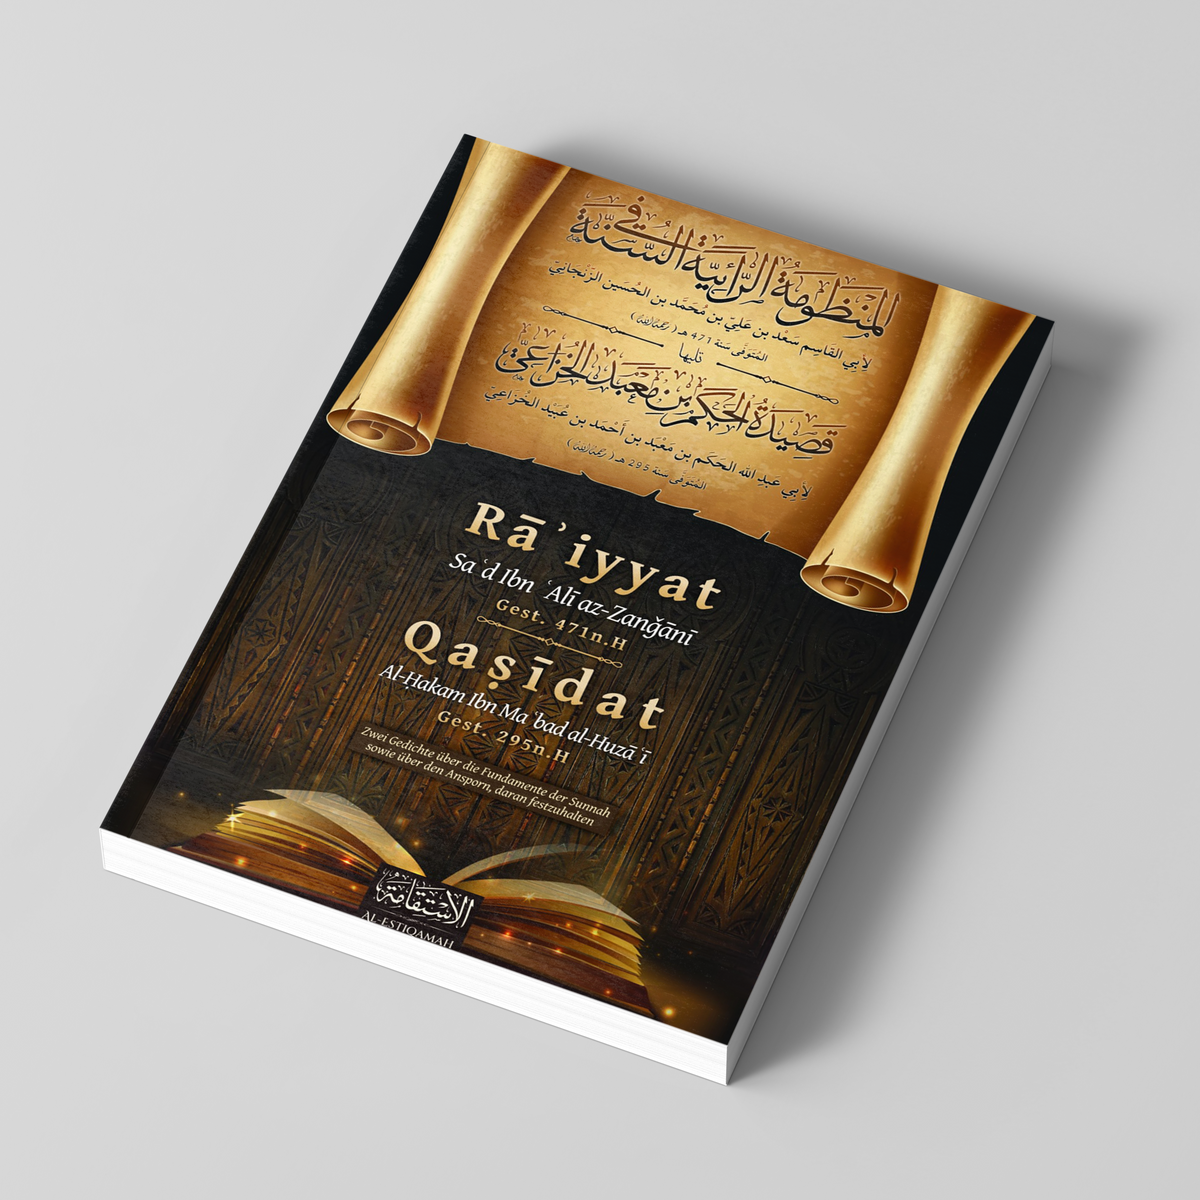 Ra'iyyat and Qasidat - Two poems about the foundations of the Sunnah